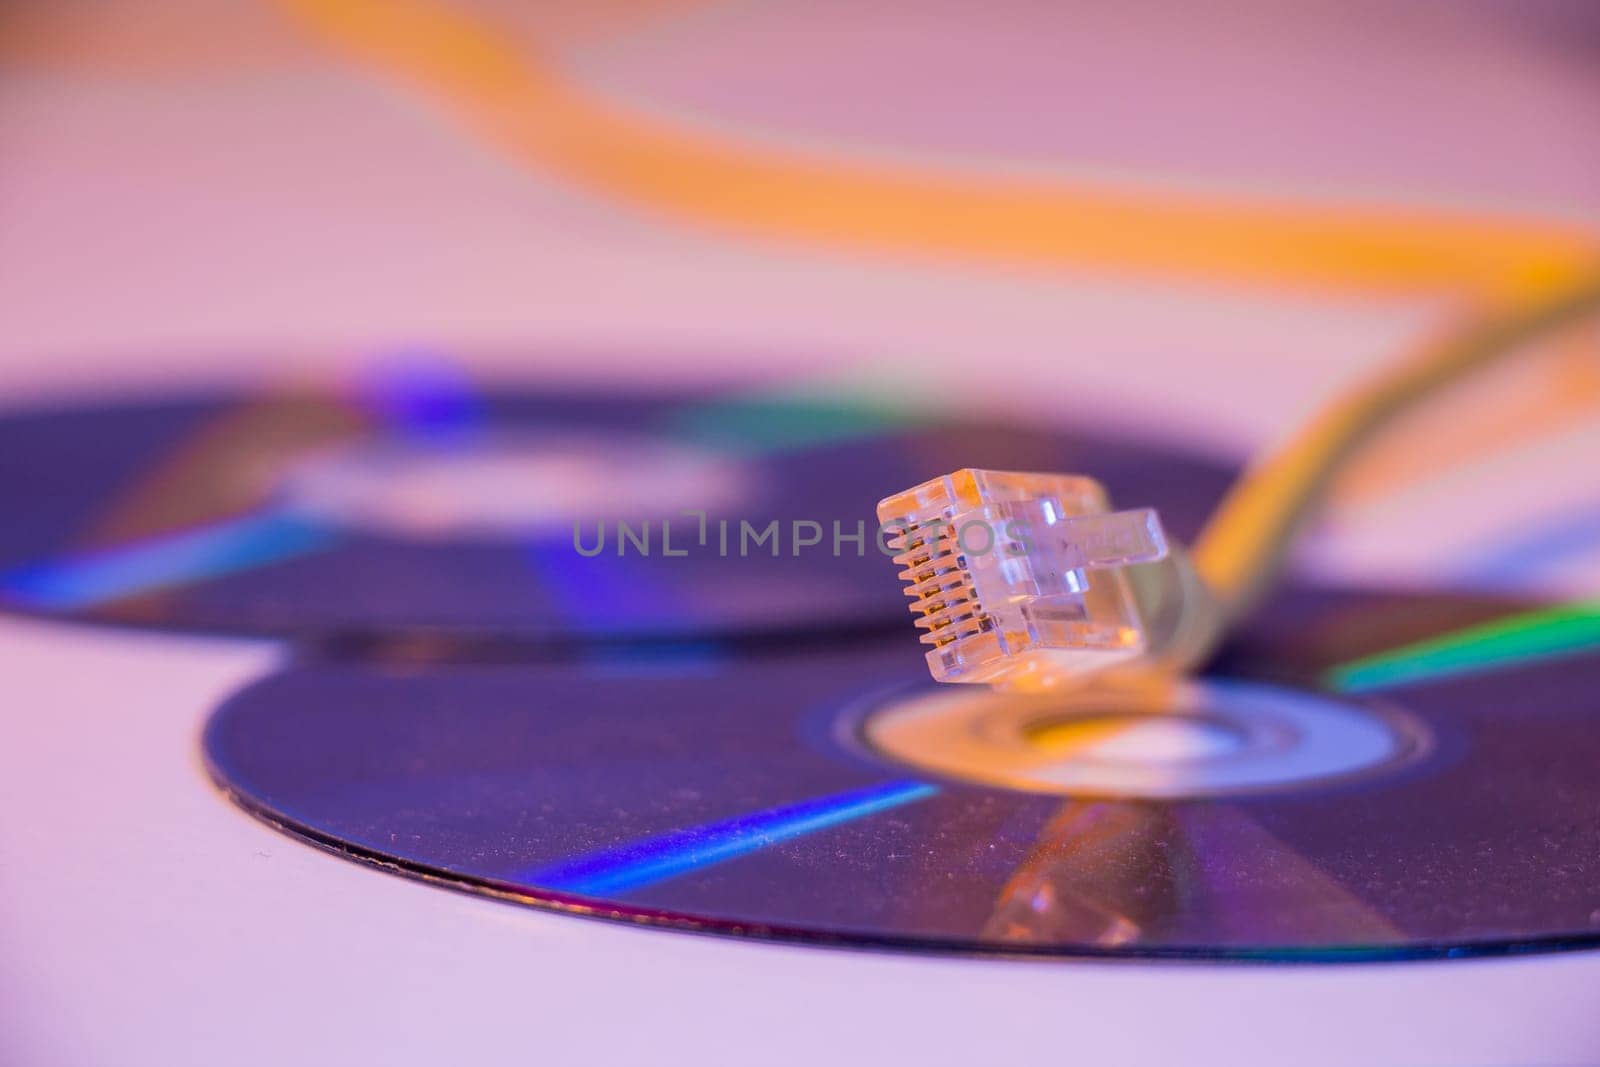 Closeup of Ethernet cable with it's reflection on blank disc by wavemovies